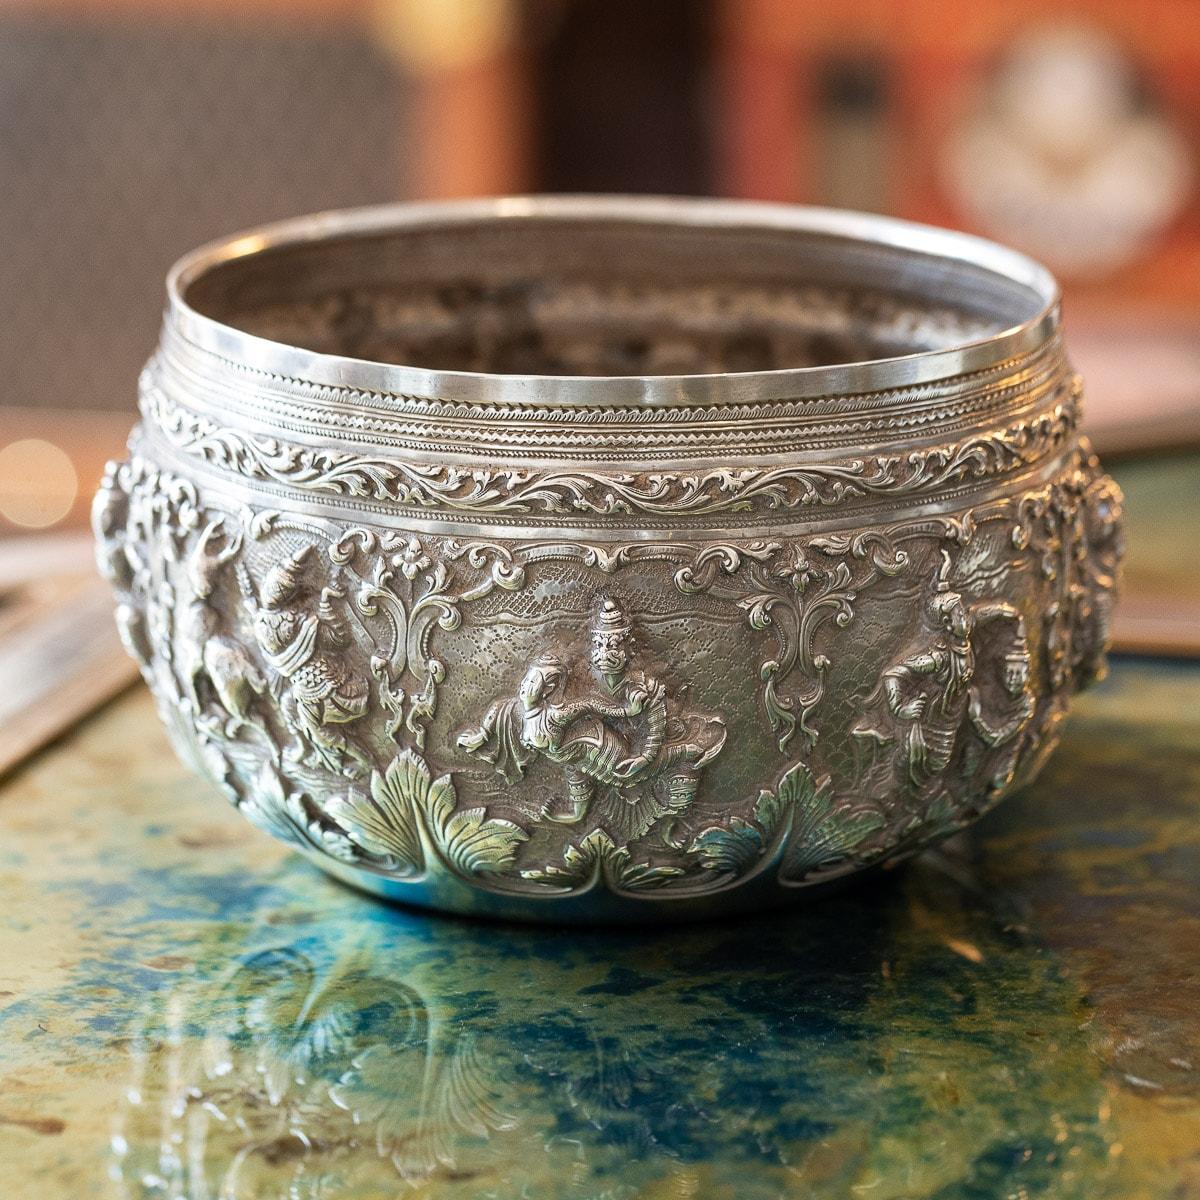 Antique 19th Century Exceptional Burmese, Myanmar Solid Silver Thabeik bowl, repousse' decorated in high relief depicting different traditional scenes from the Burmese mythology, showing large detailed figures set against a chiseled matted